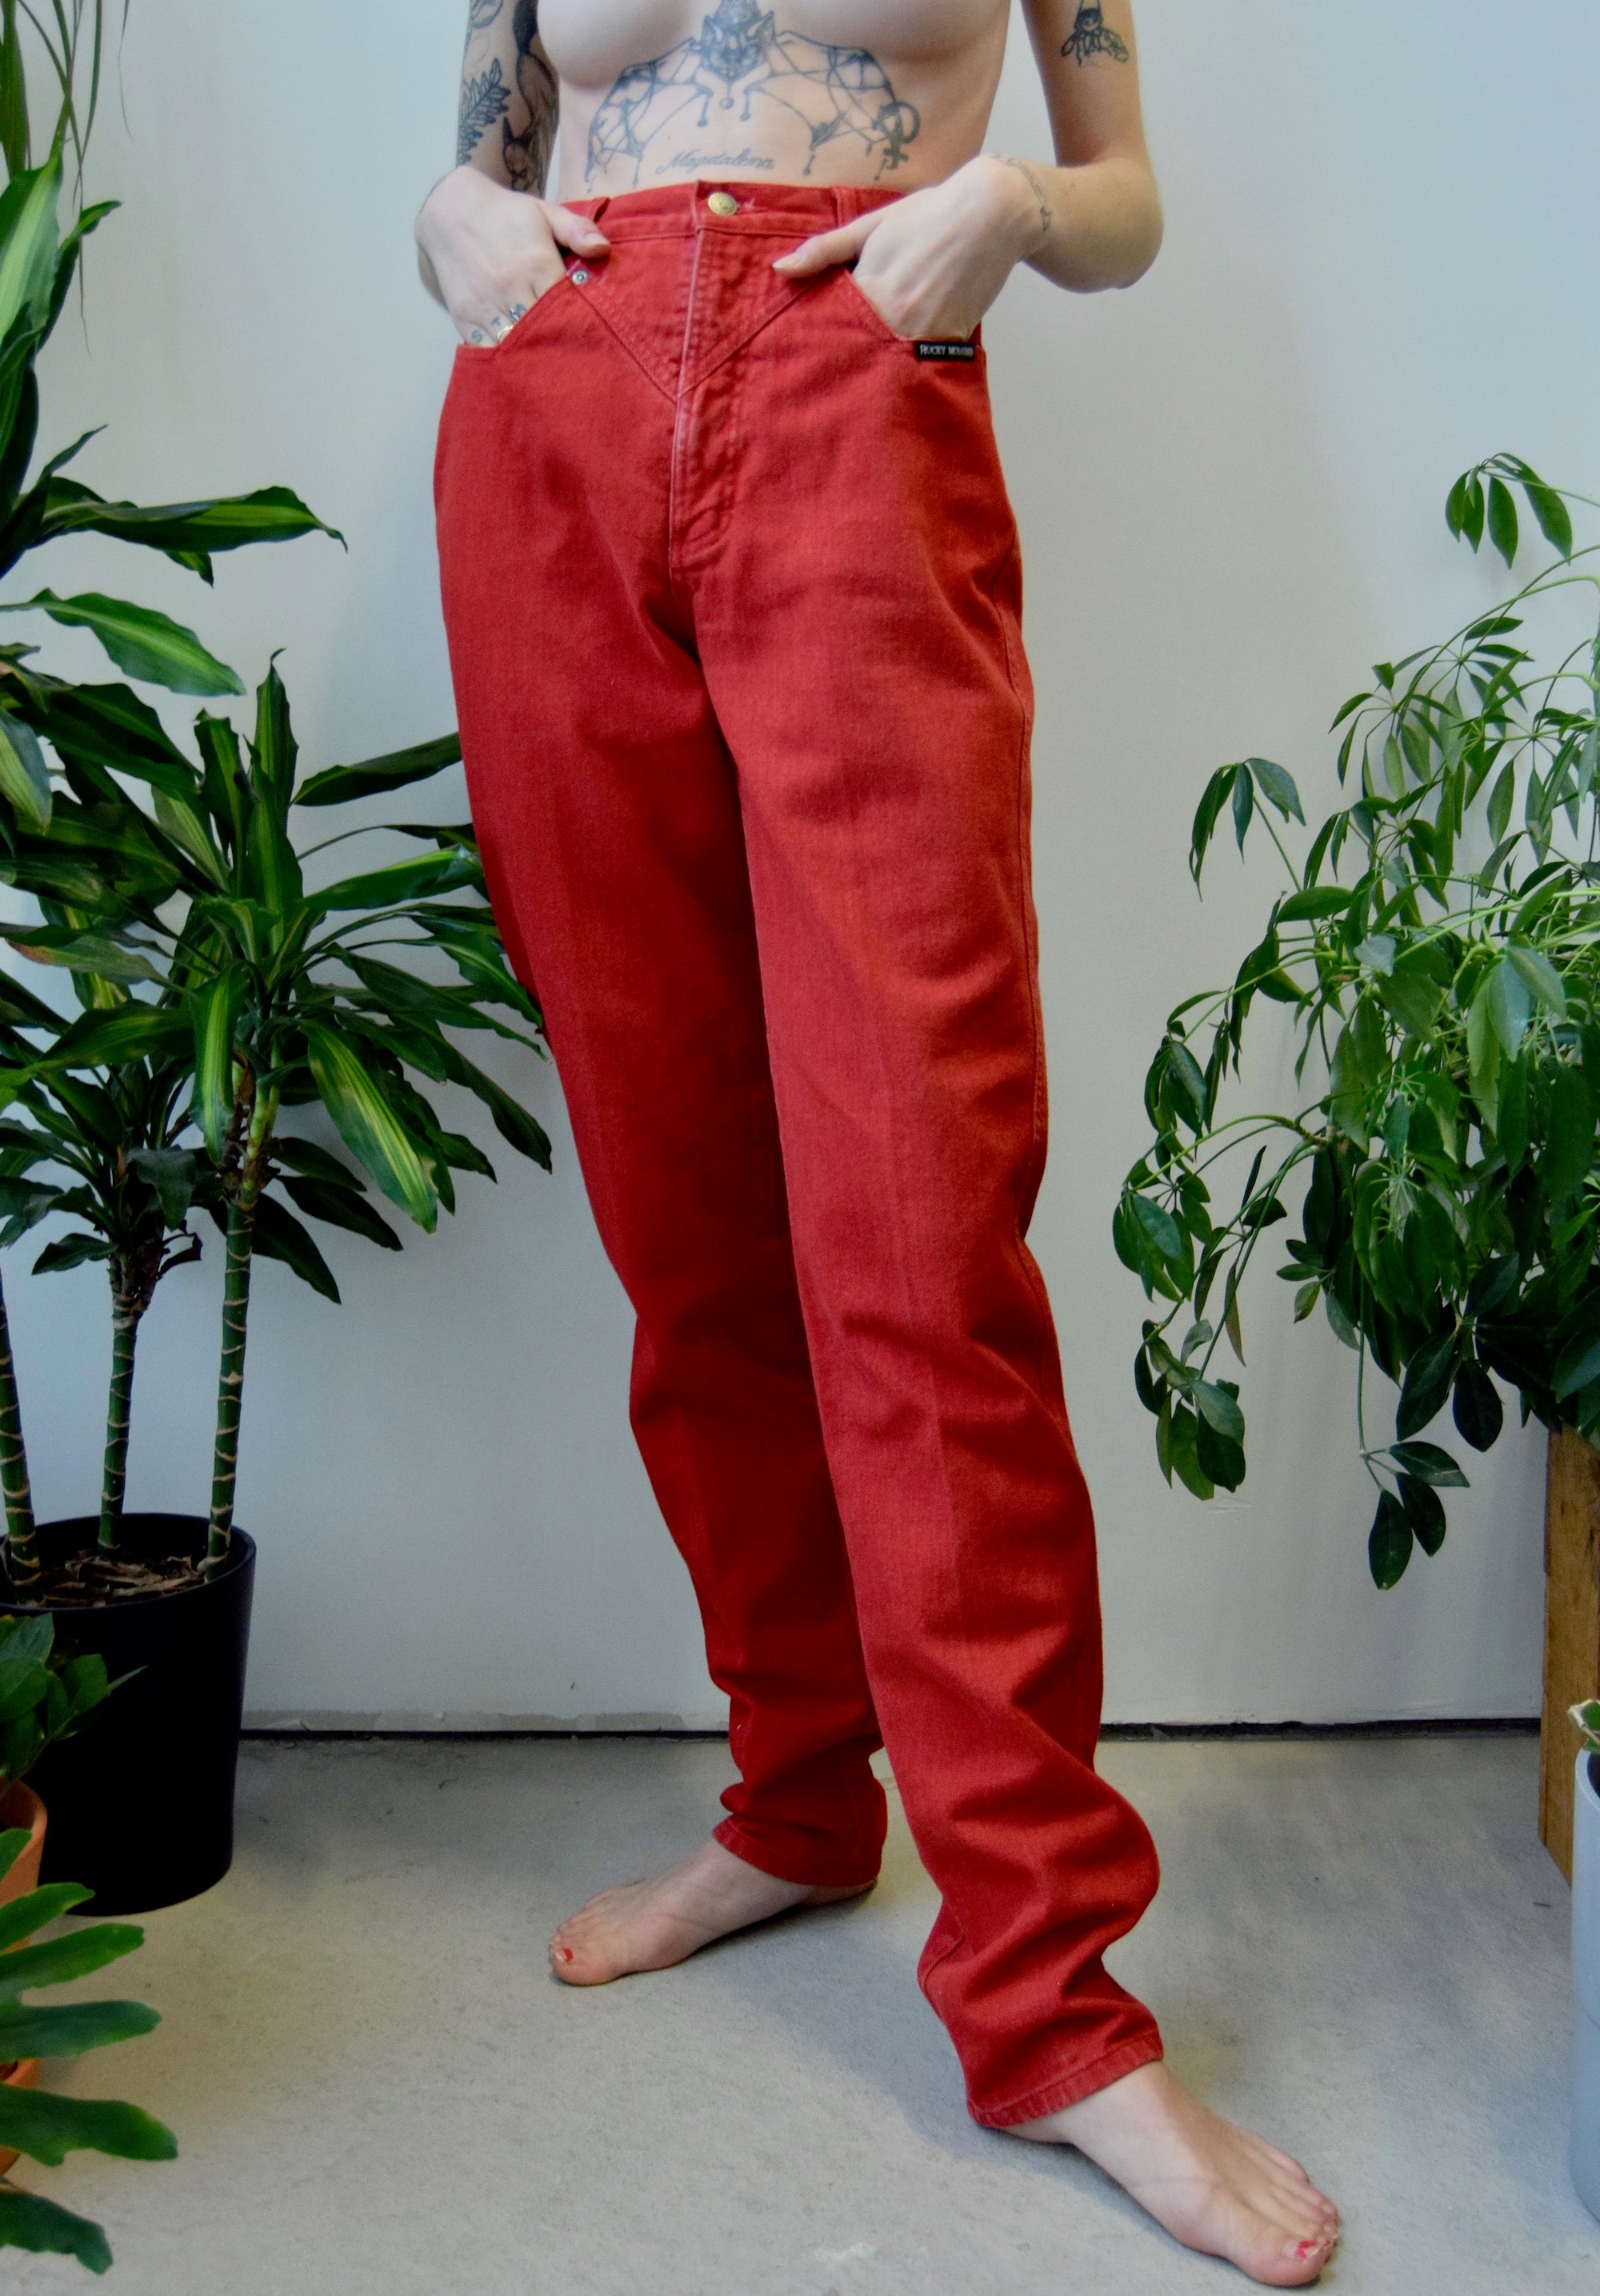 Cherry Red "Rocky Mountain" Jeans